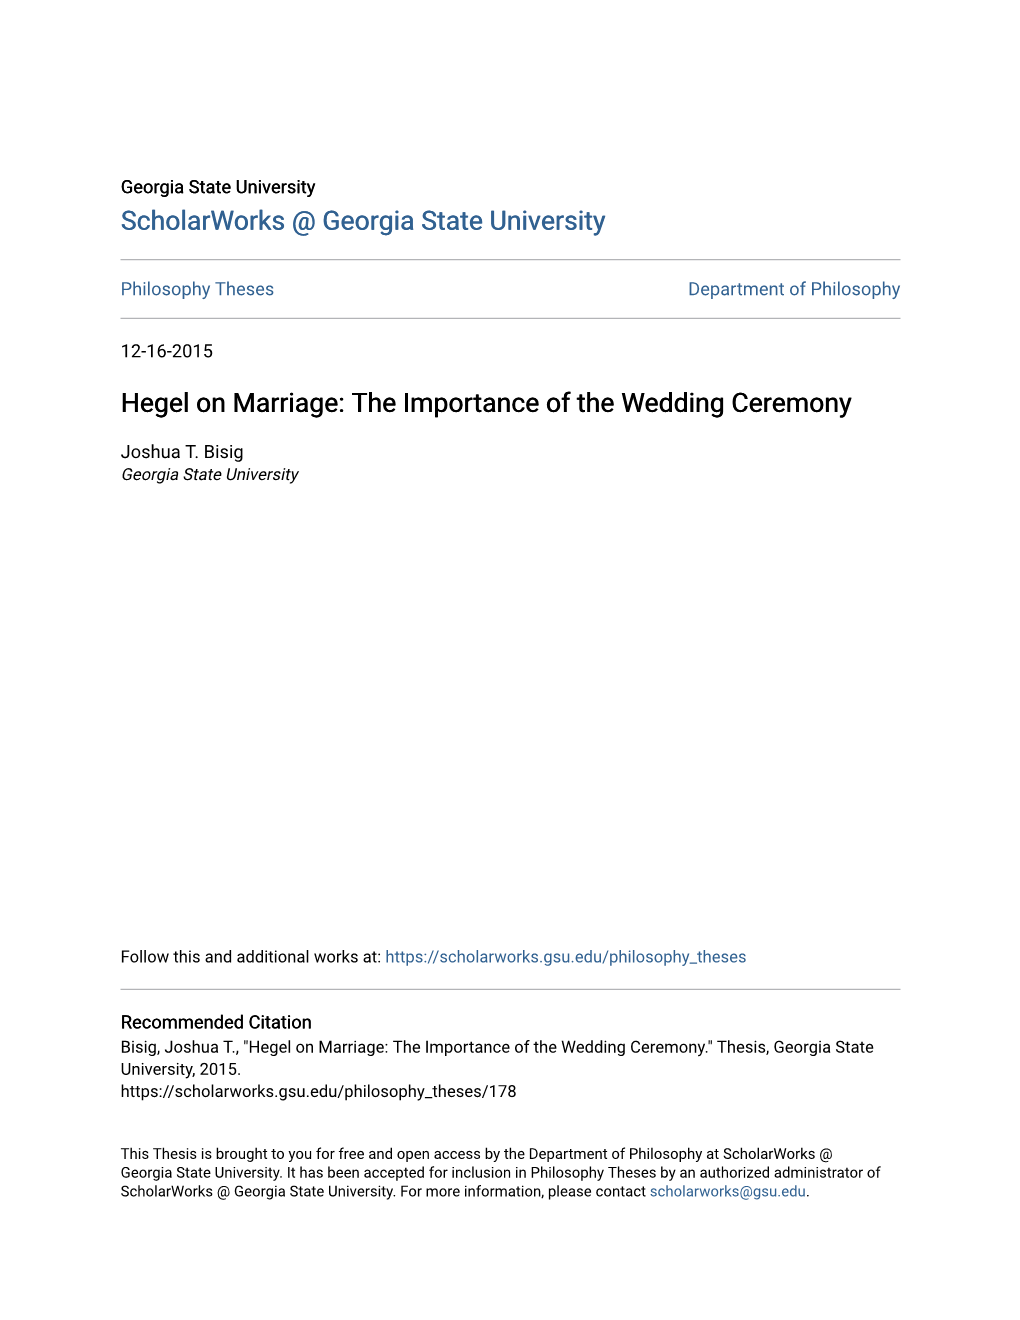 Hegel on Marriage: the Importance of the Wedding Ceremony